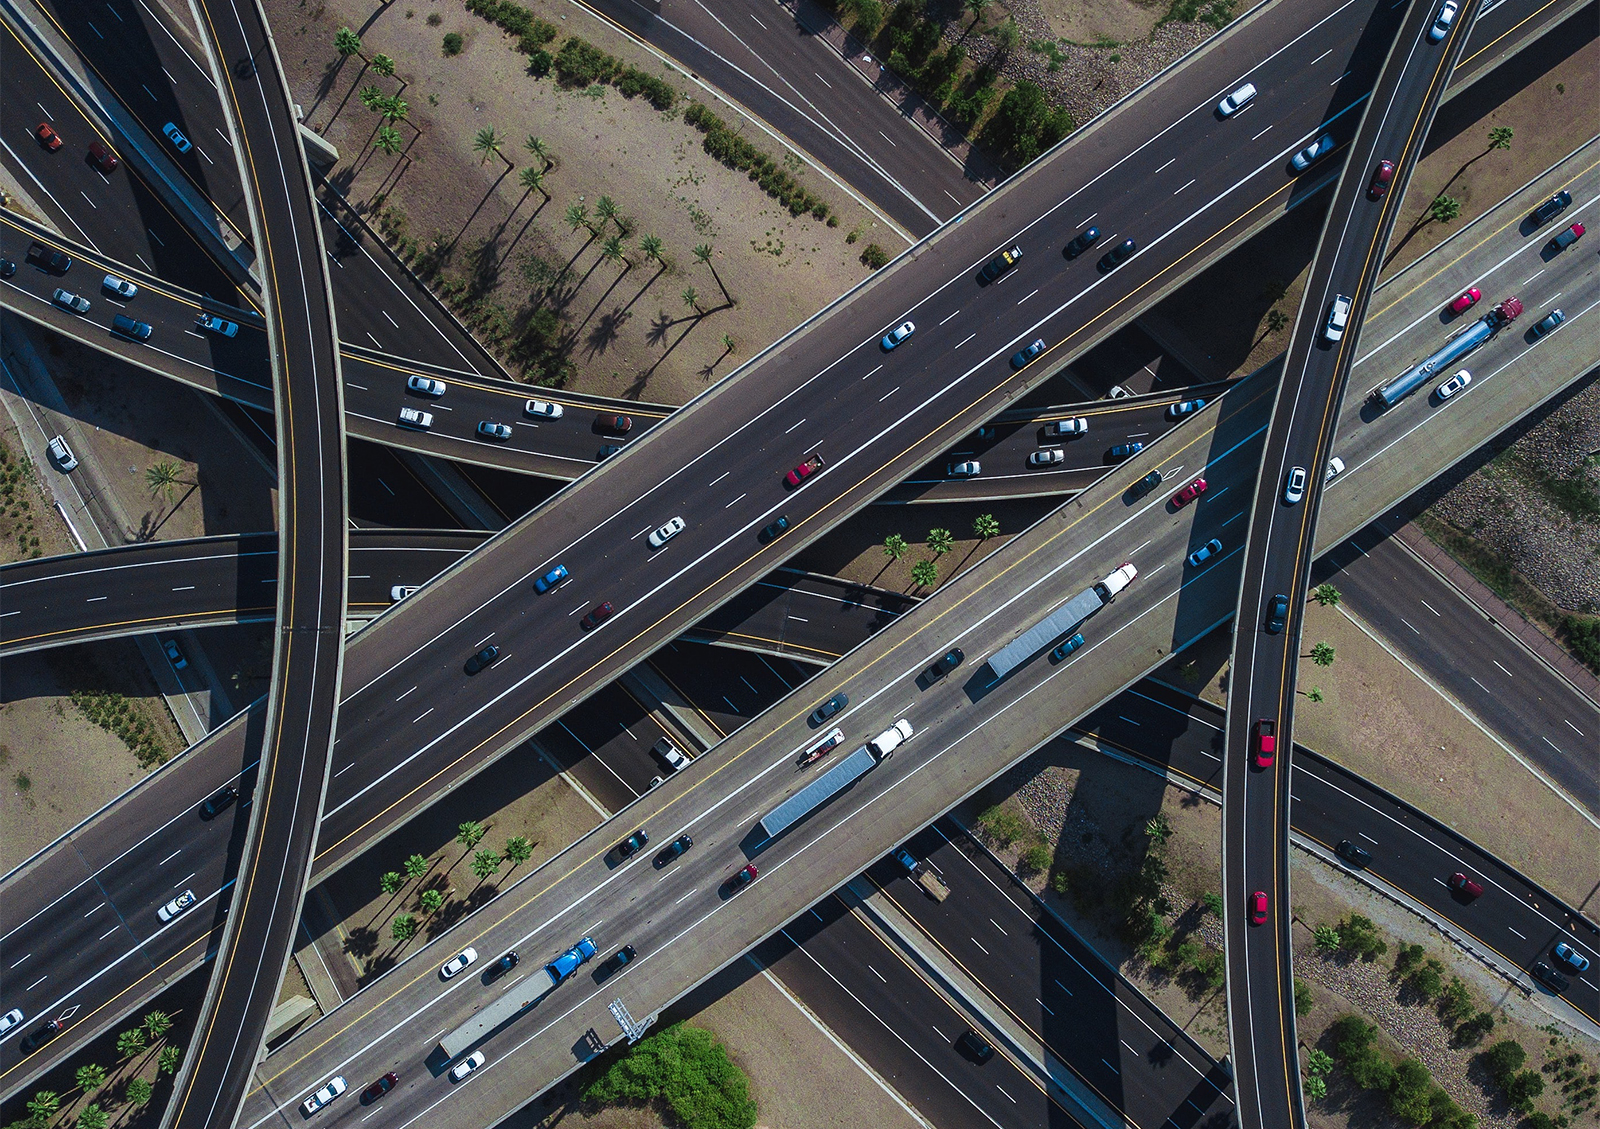 Vehicles travel along multiple layers of overpasses in Phoenix. Photo by Jared Murray/Unsplash/Creative Commons